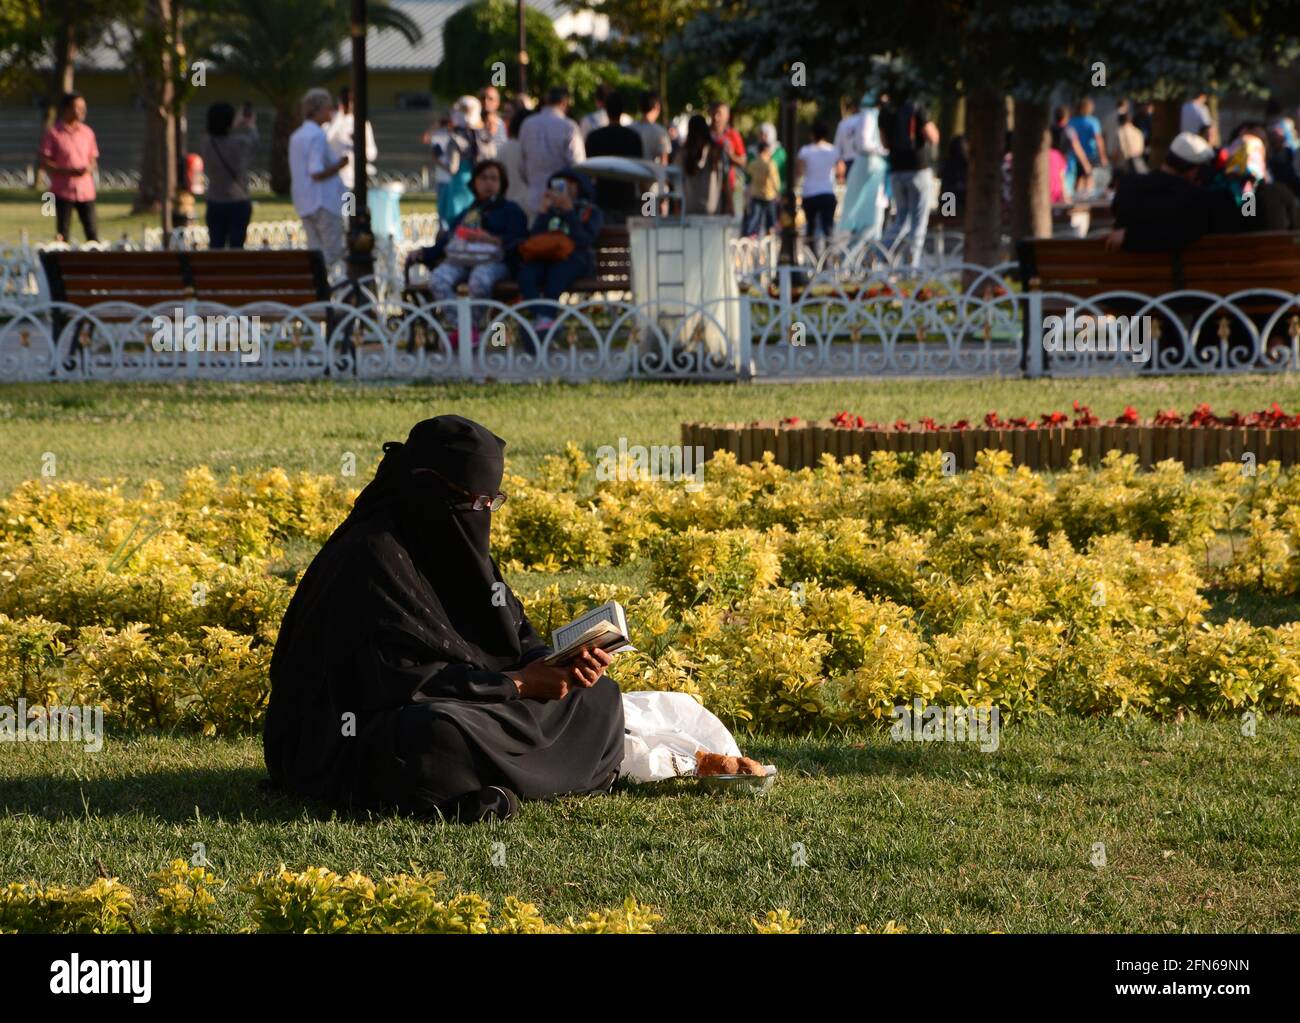 A lady wearing a burqa sat reading a book in Sultanahmet park in Istanbul. Traditional Islamic clothing worn by women to cover their whole body. Stock Photo